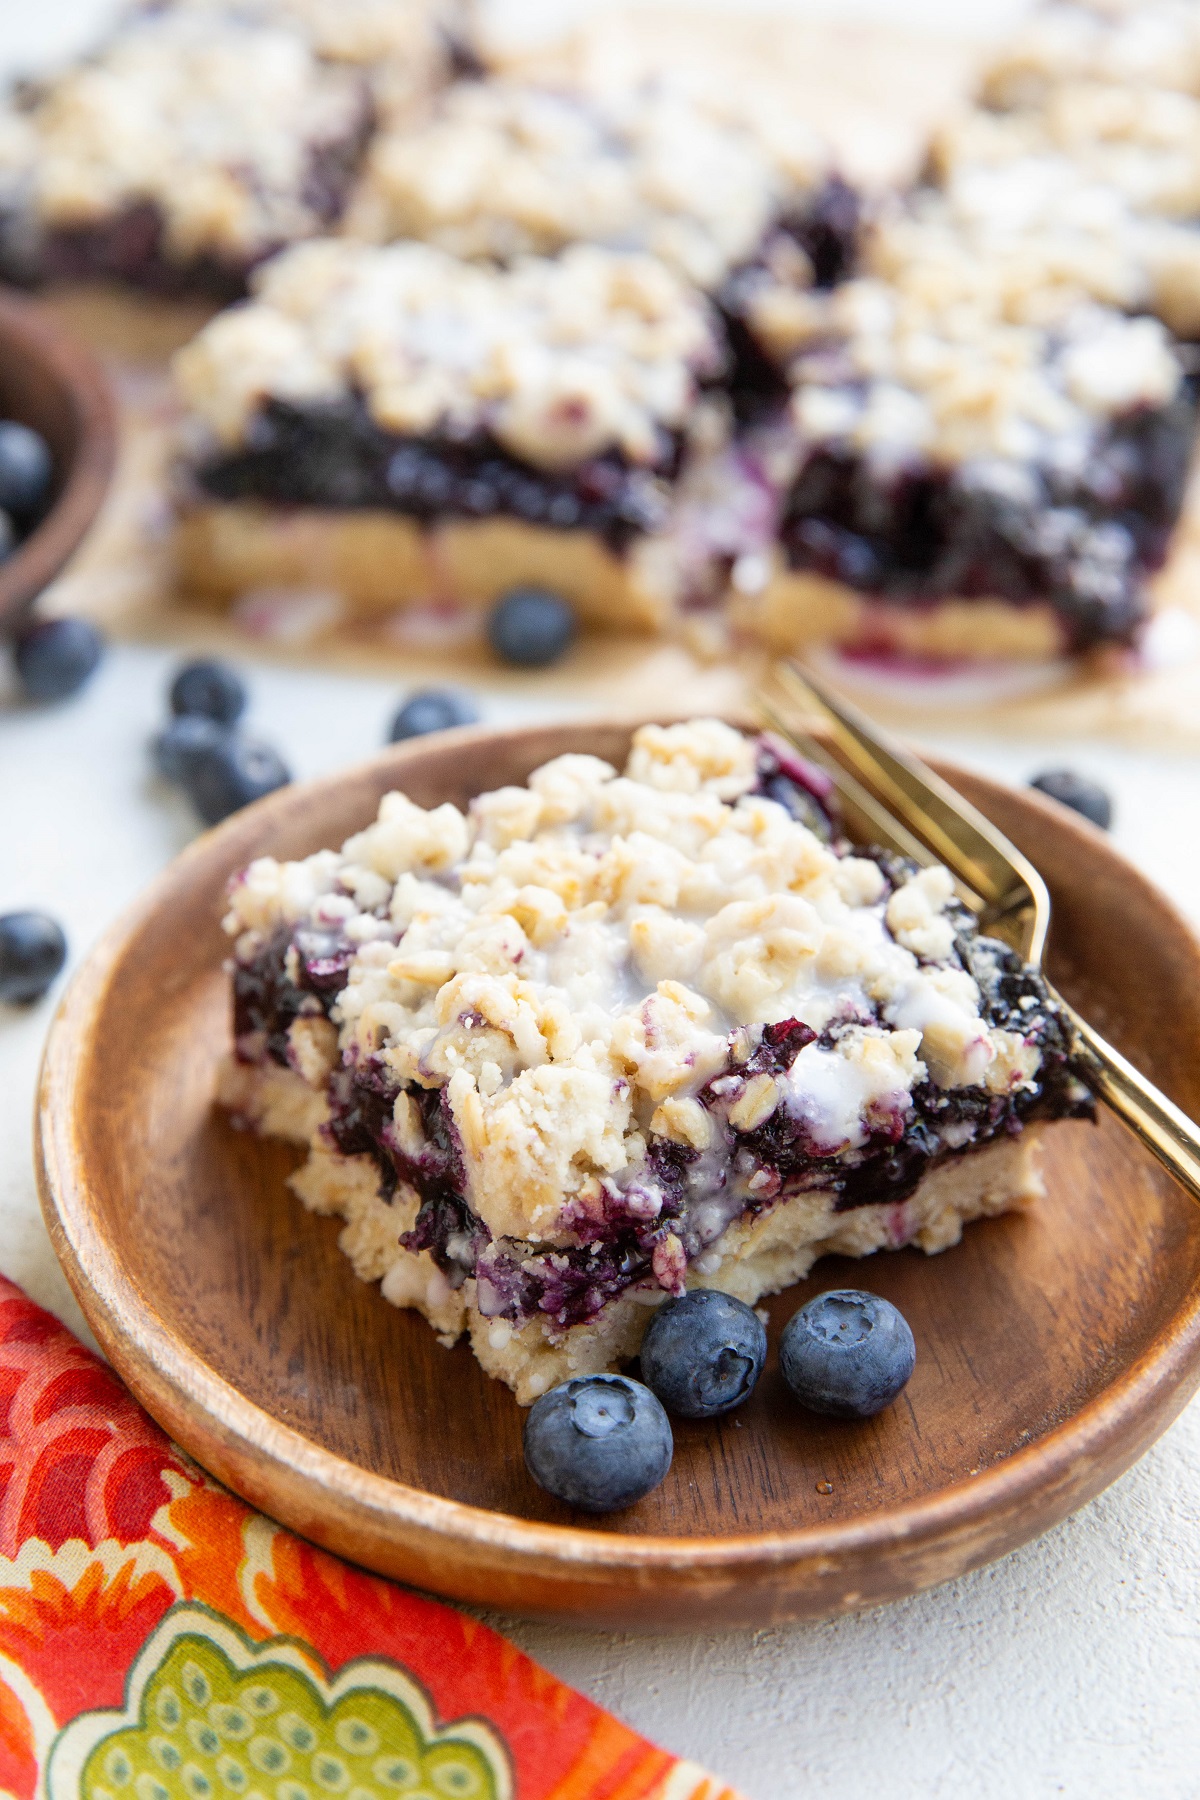 Blueberry crumb bar on a wooden plate with a golden fork and blueberries